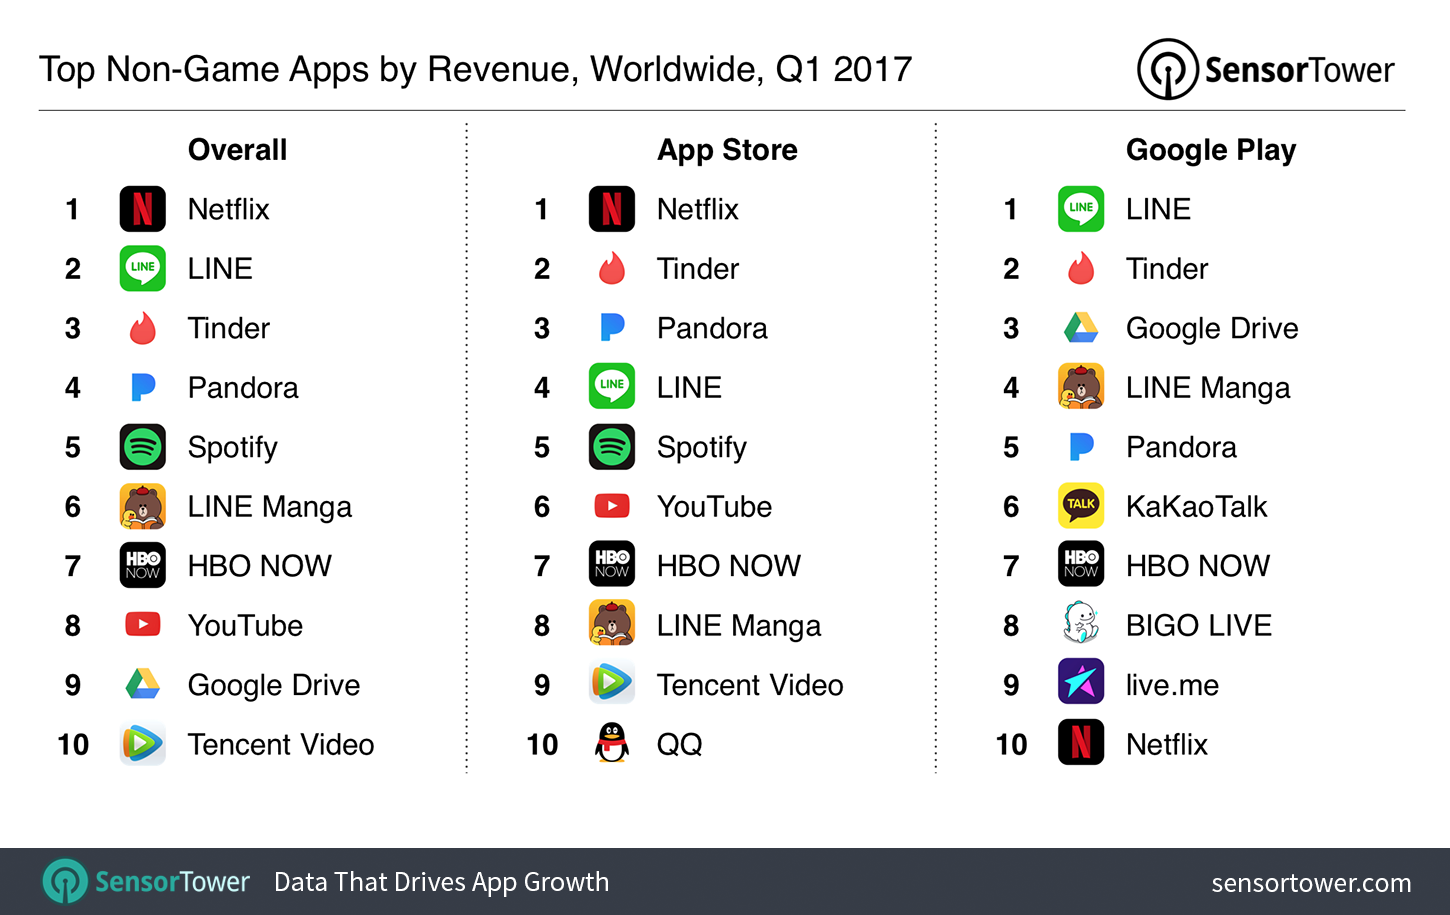 Q1 2017's Top Mobile Apps by Worldwide Revenue